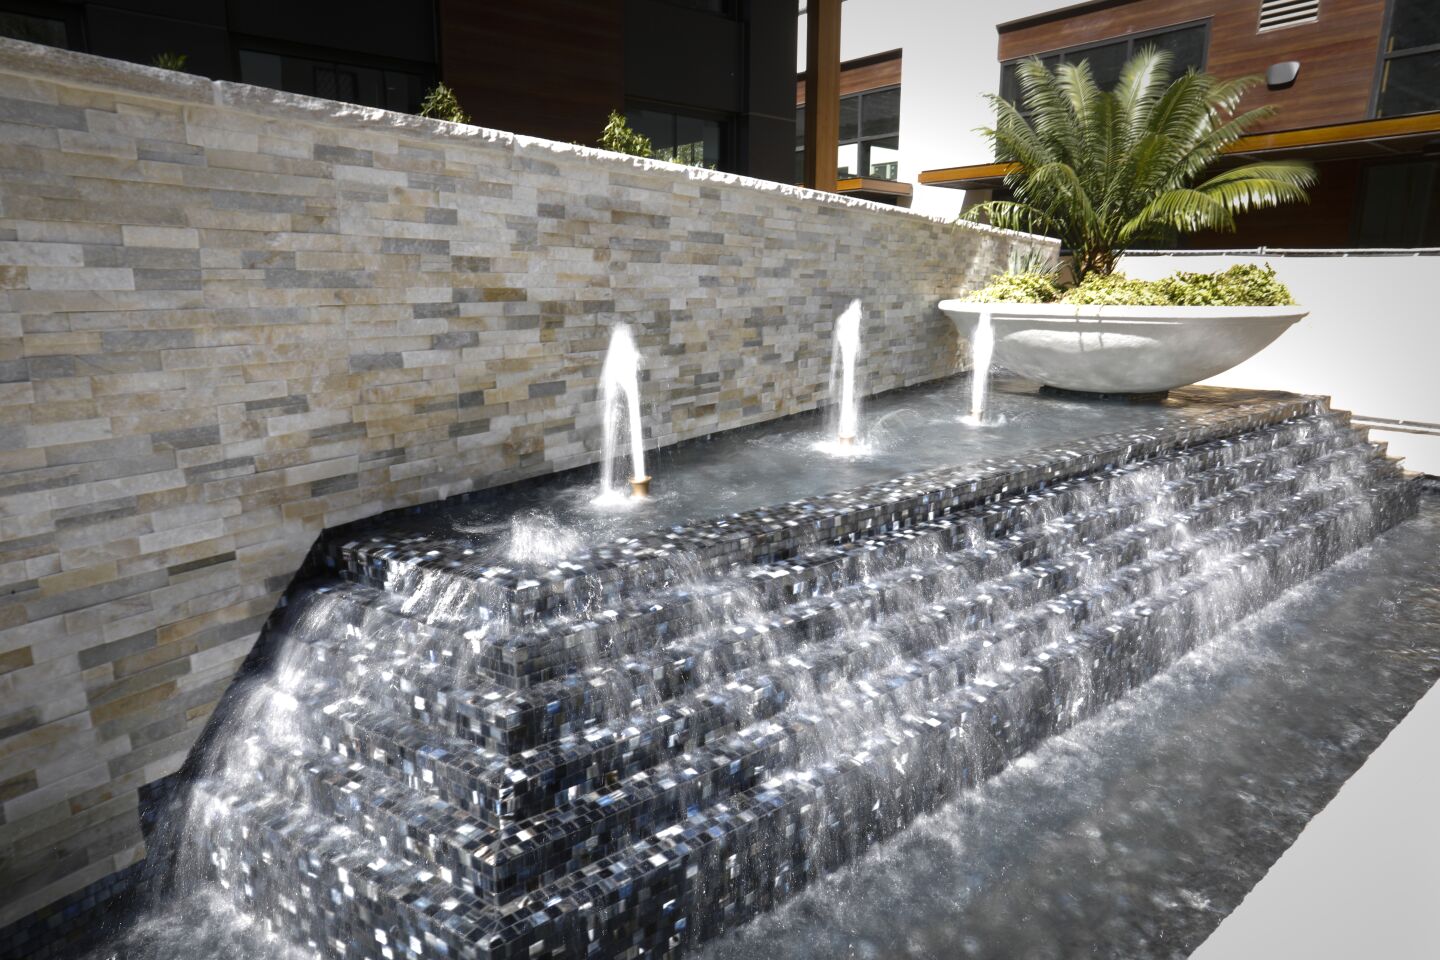 A fountain at One Paseo, the upscale apartment homes project in Carmel Valley, part of the 23-acre mixed-use project. Photographed October 8, 2019, in San Diego, California.